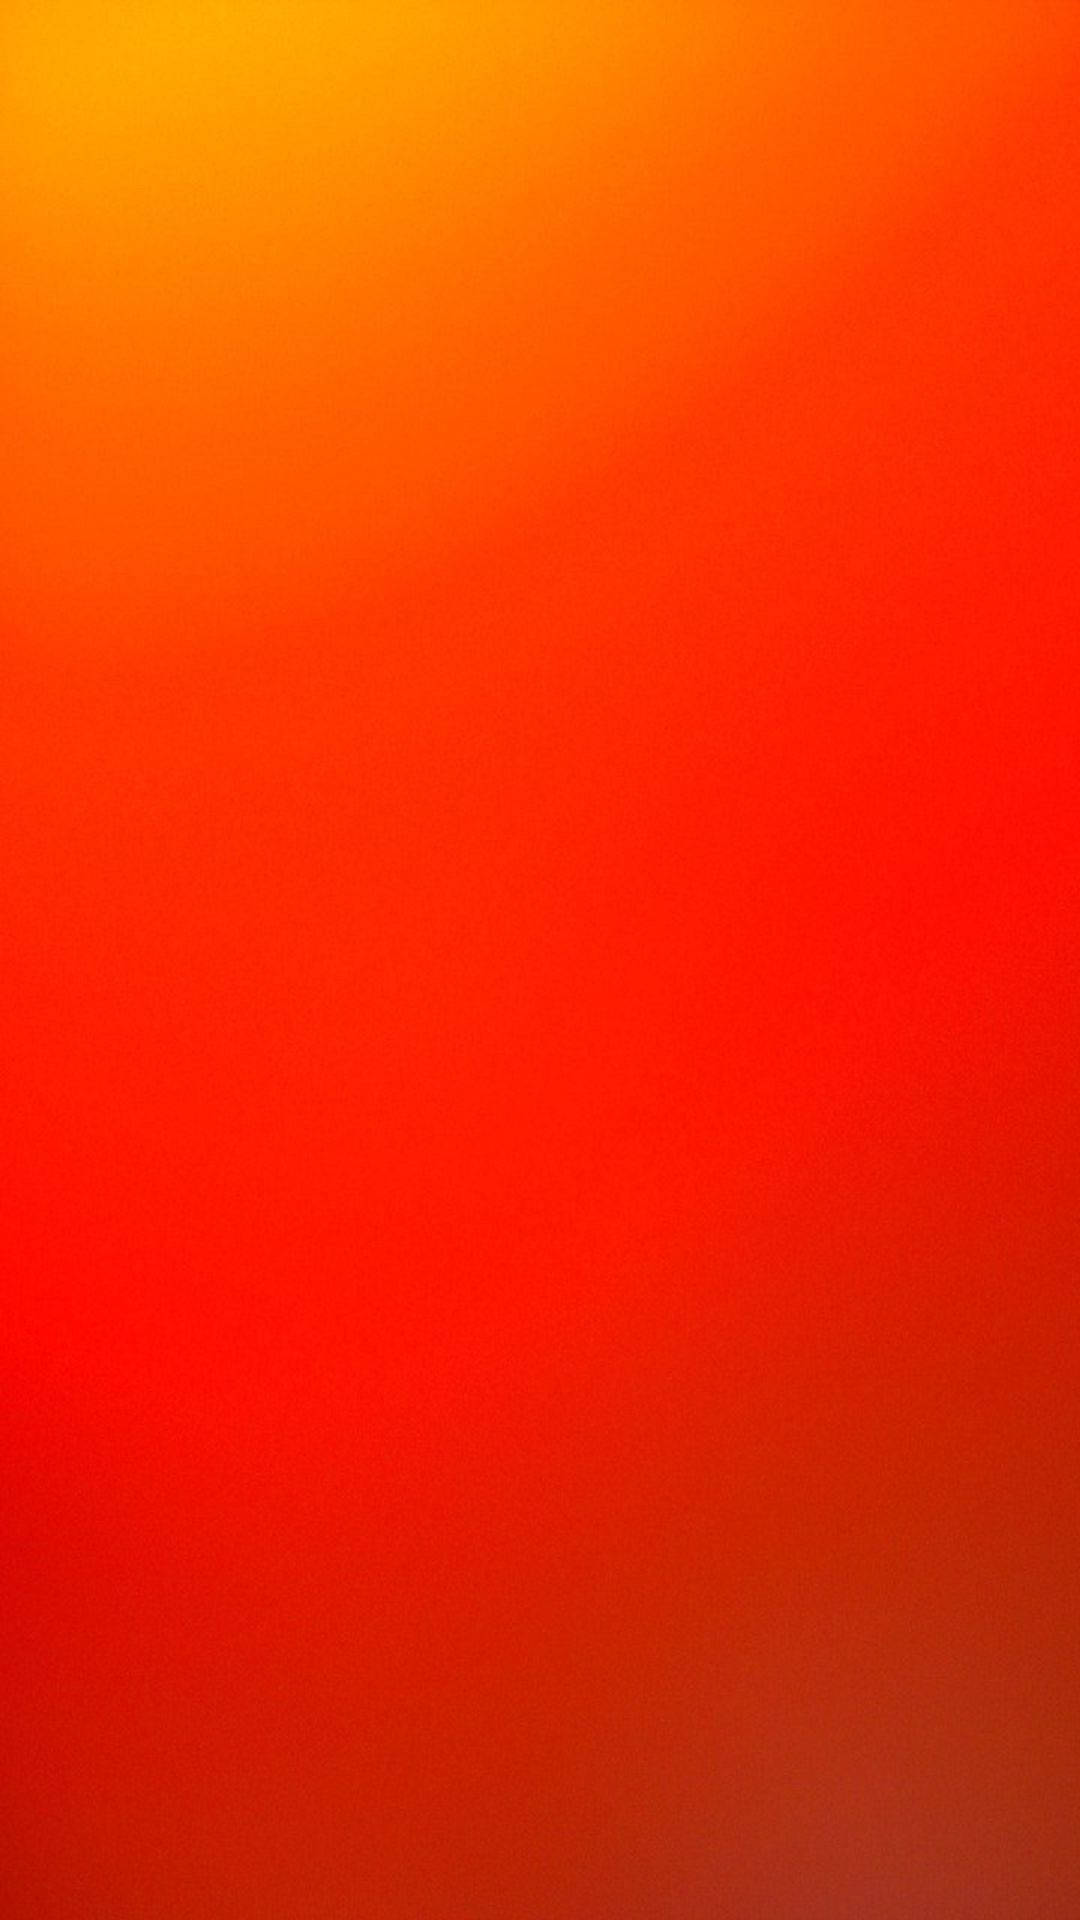 Solid Orange And Red Phone Wallpaper